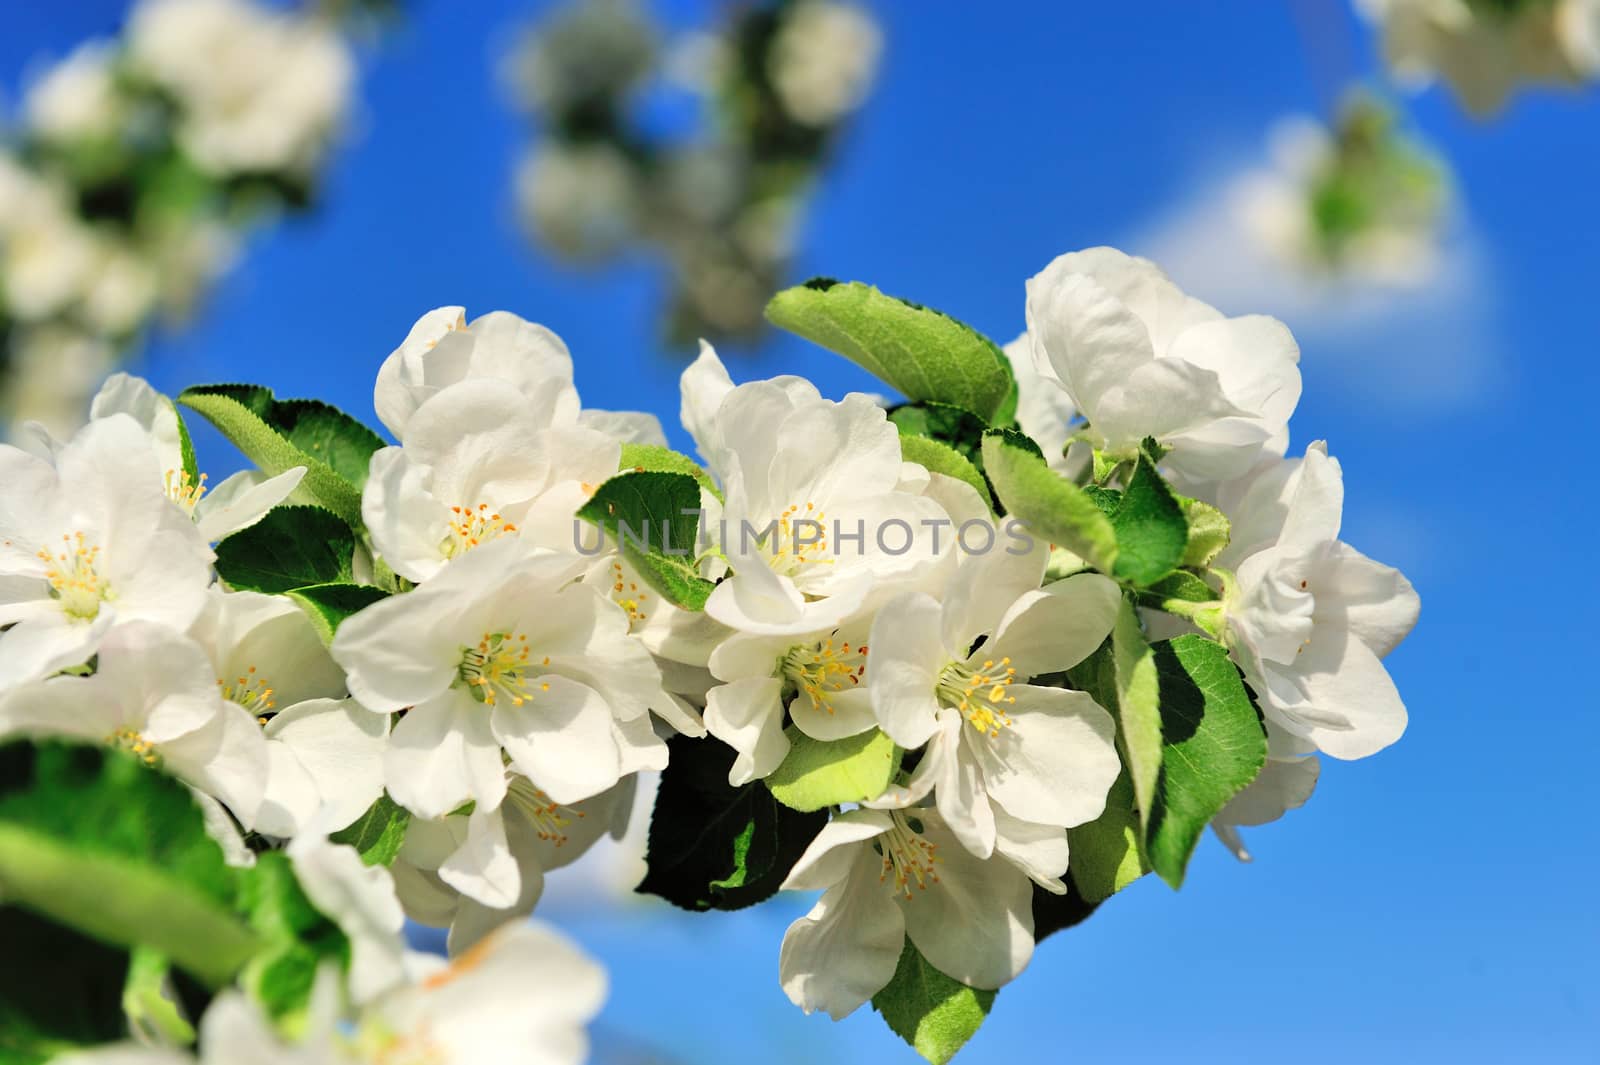 Photo of blossoming tree brunch with white flowers